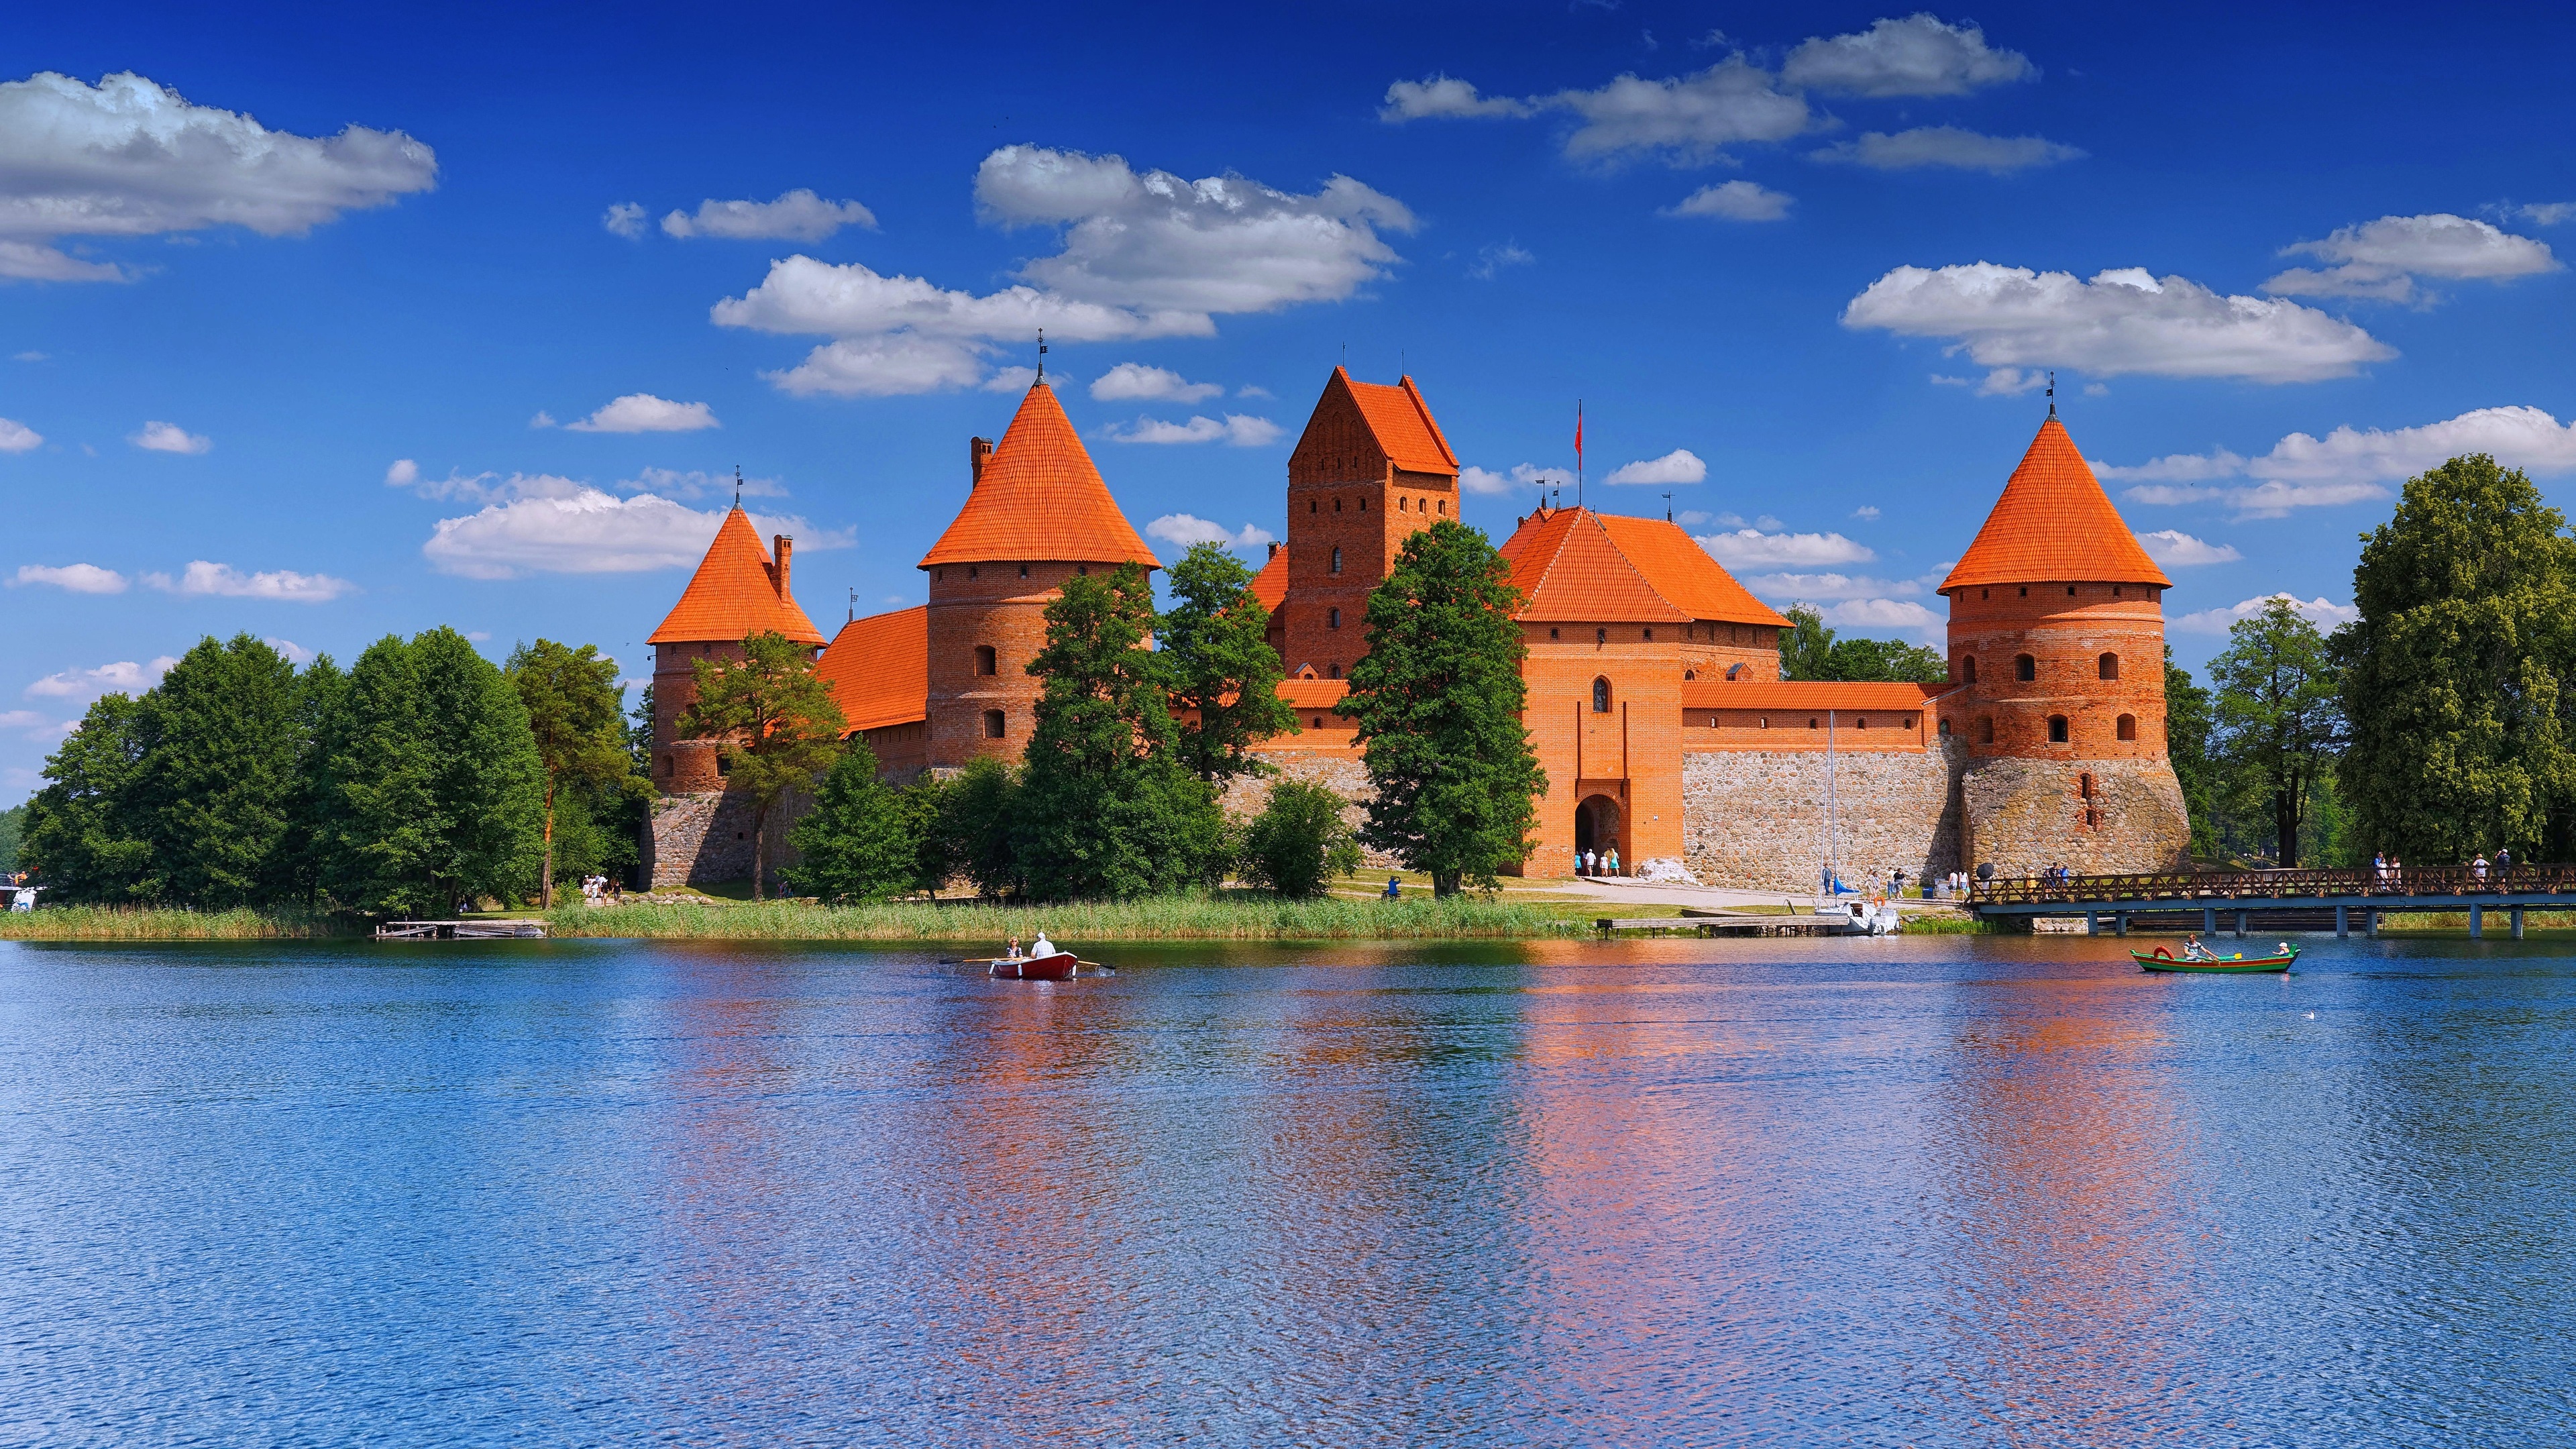 The Trakai Tower in Lithuania